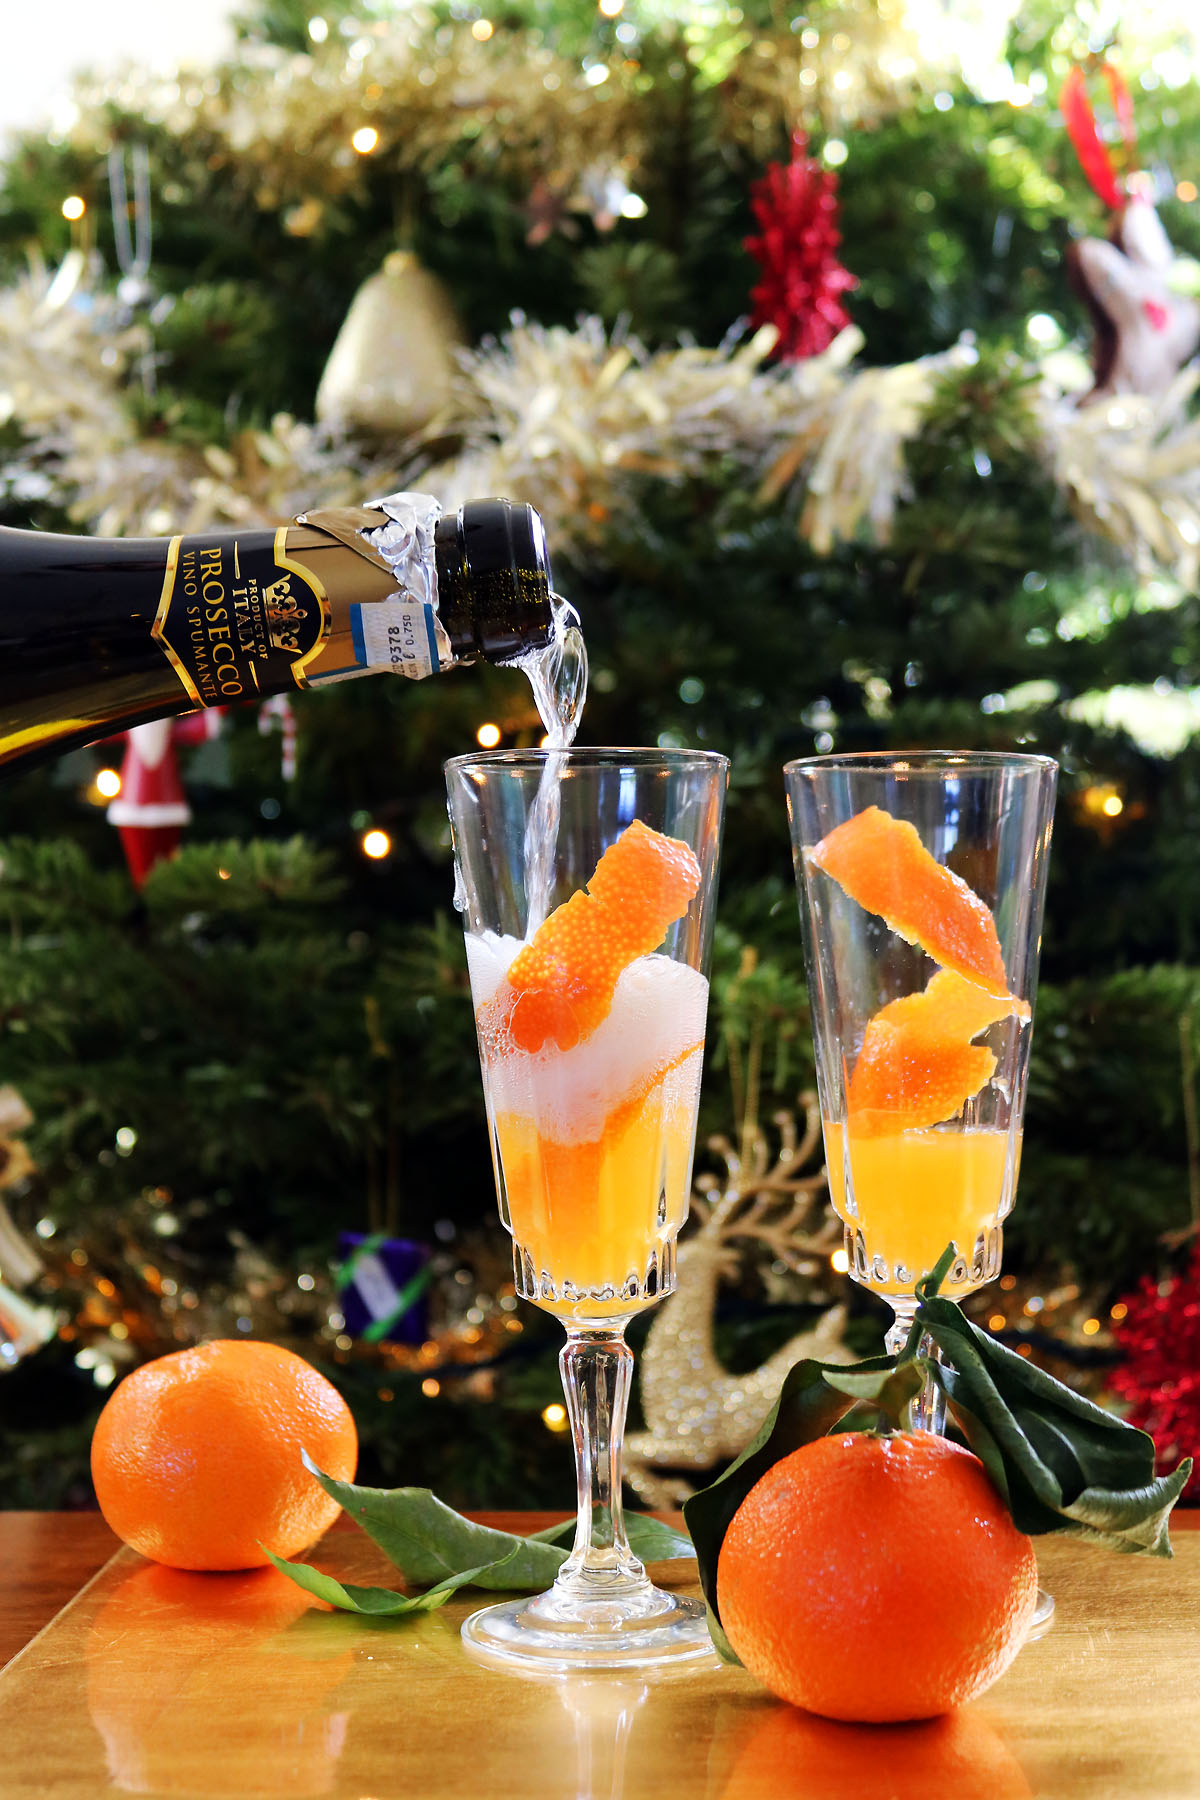 Prosecco poured over clementine juice is the perfect New Years Eve party cocktail or New Years Day brunch cocktail. Get the recipe at Supper in the Suburbs!